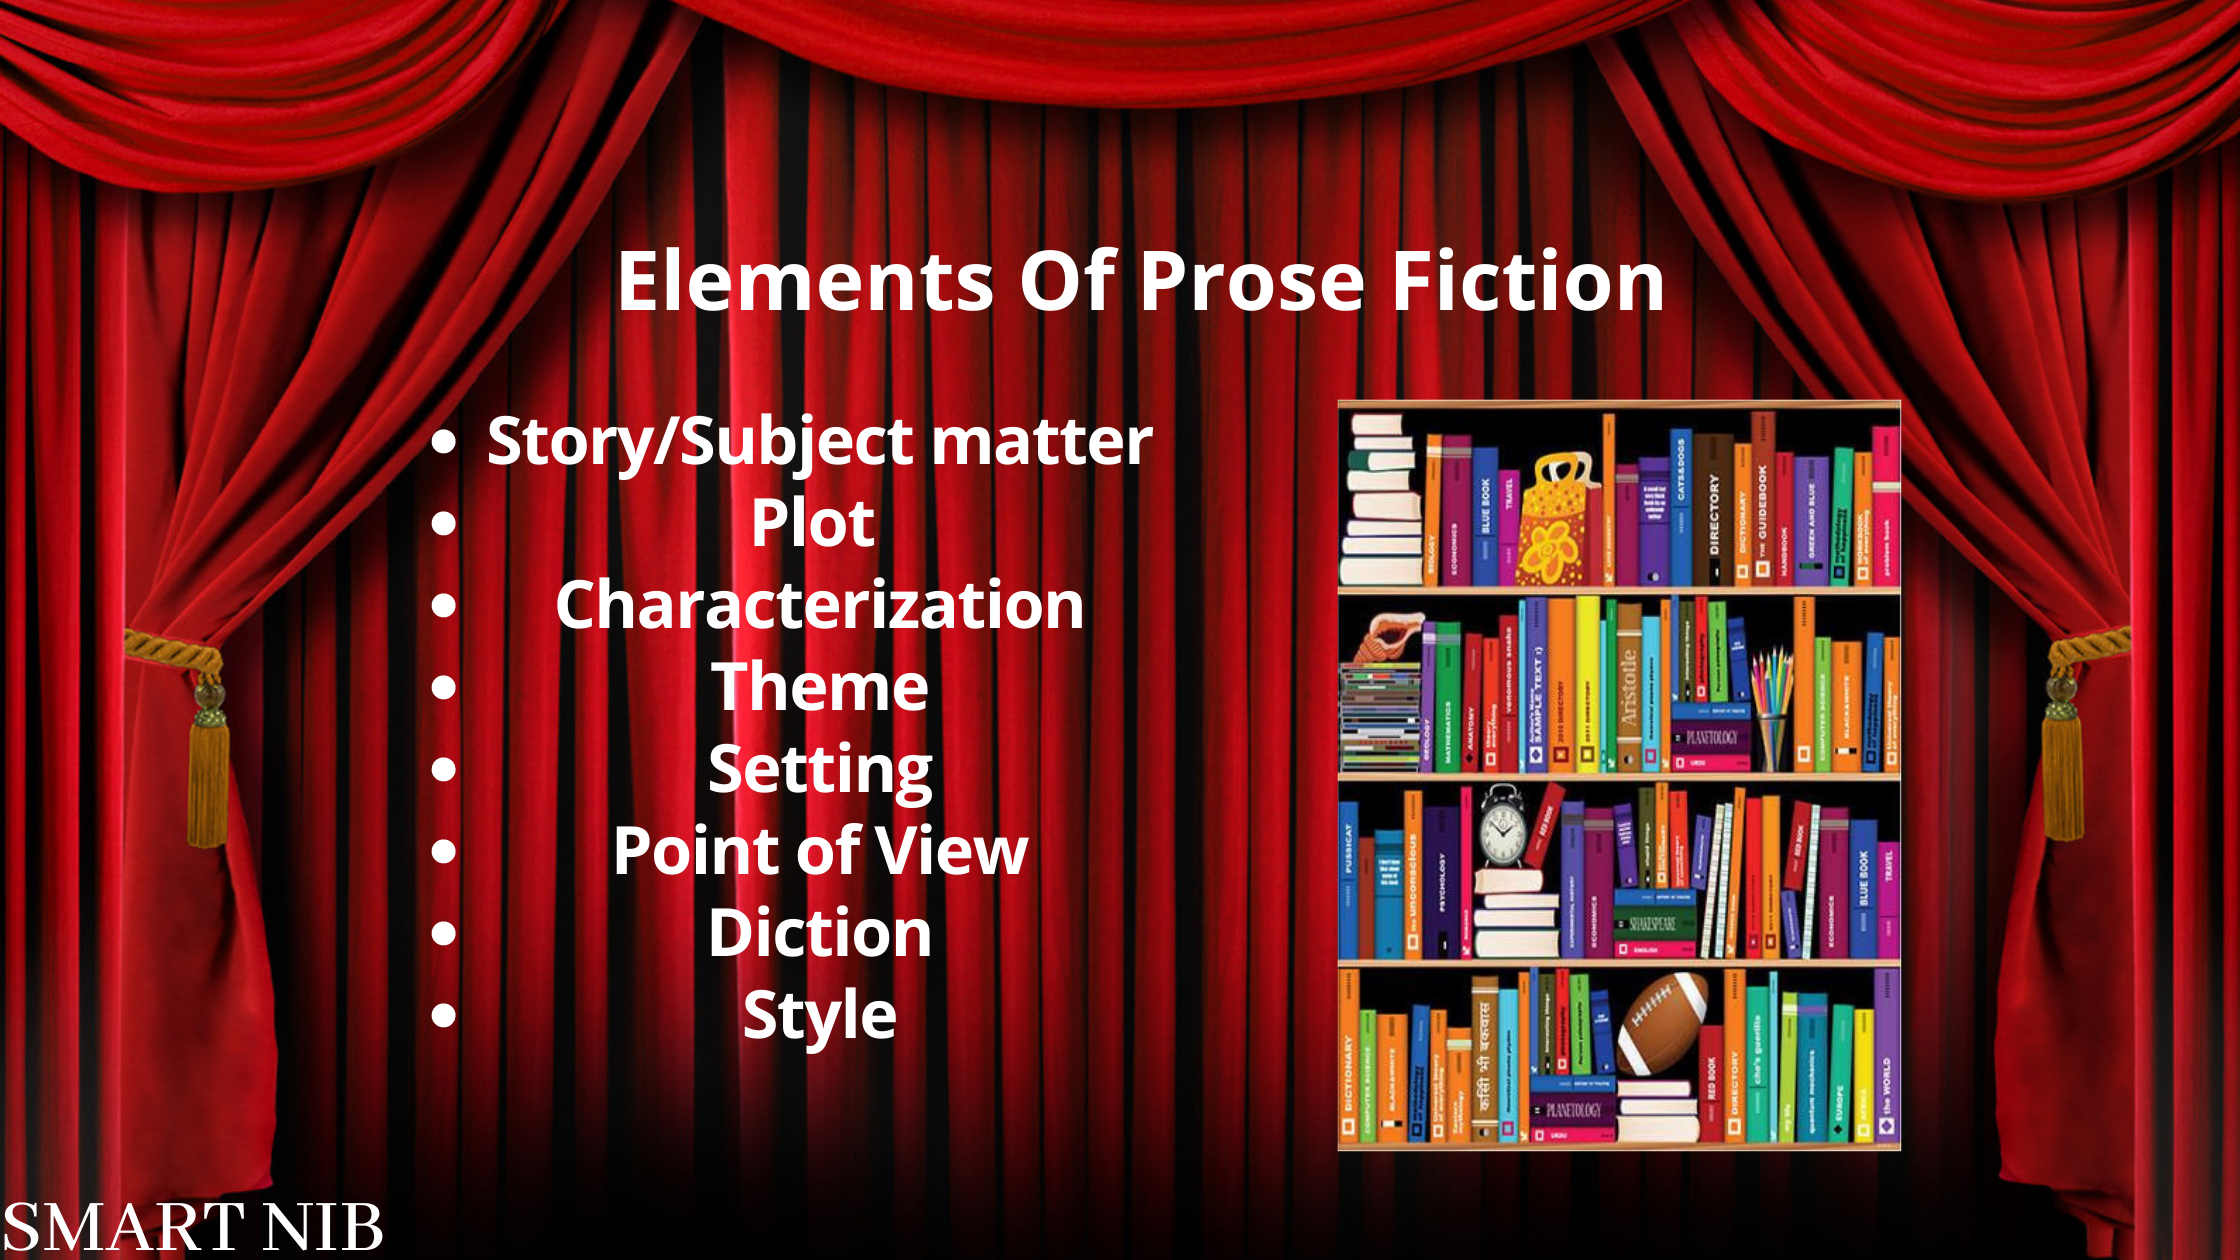 What are the Elements of Prose Fiction?